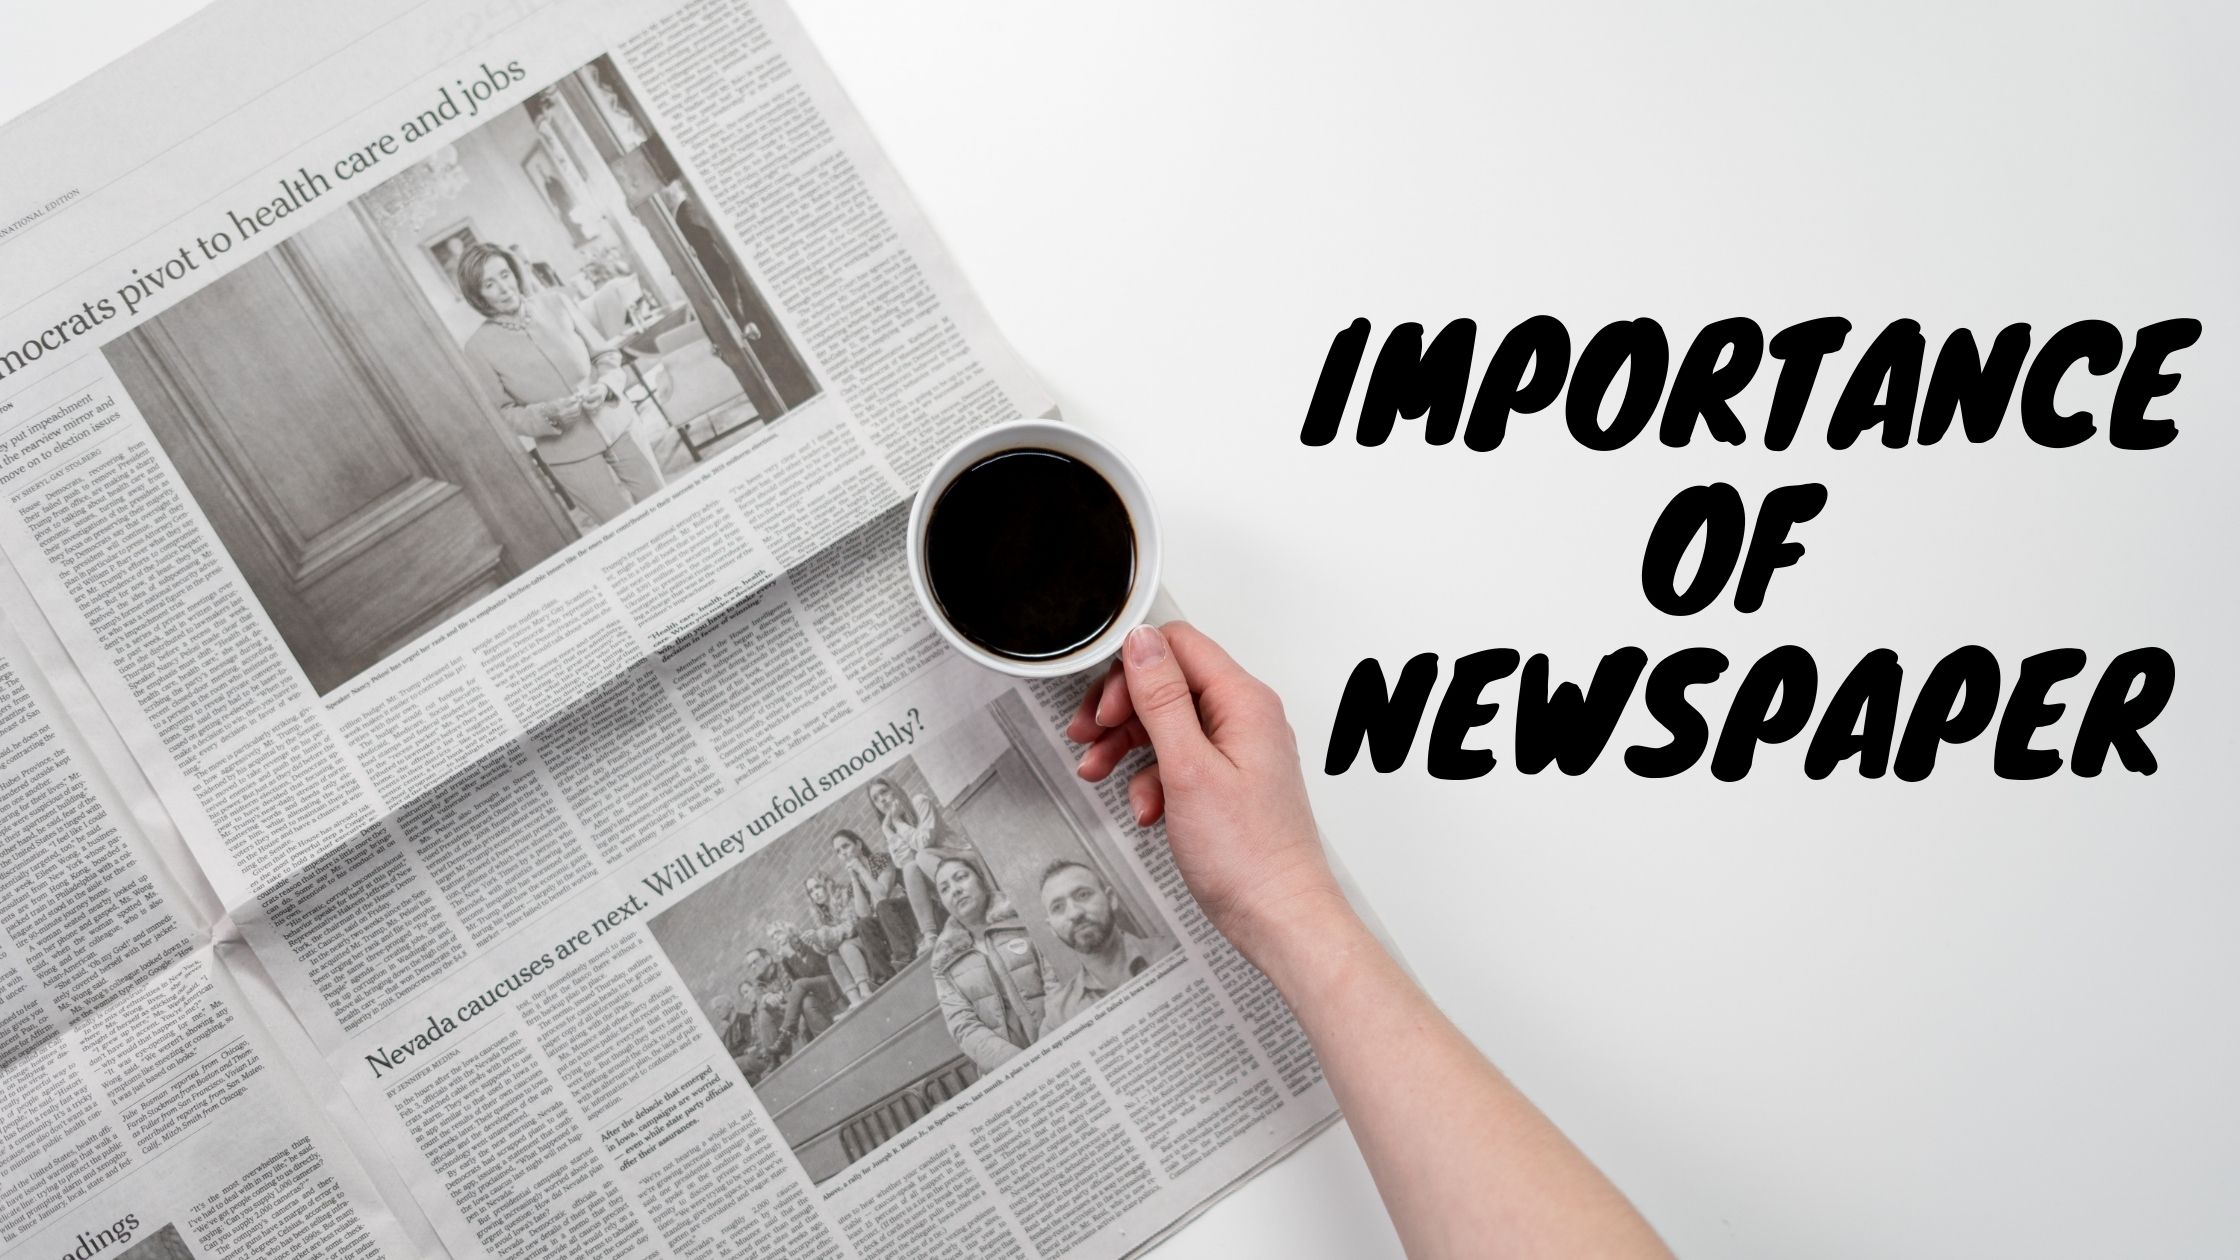 speech on importance of newspaper in our daily life